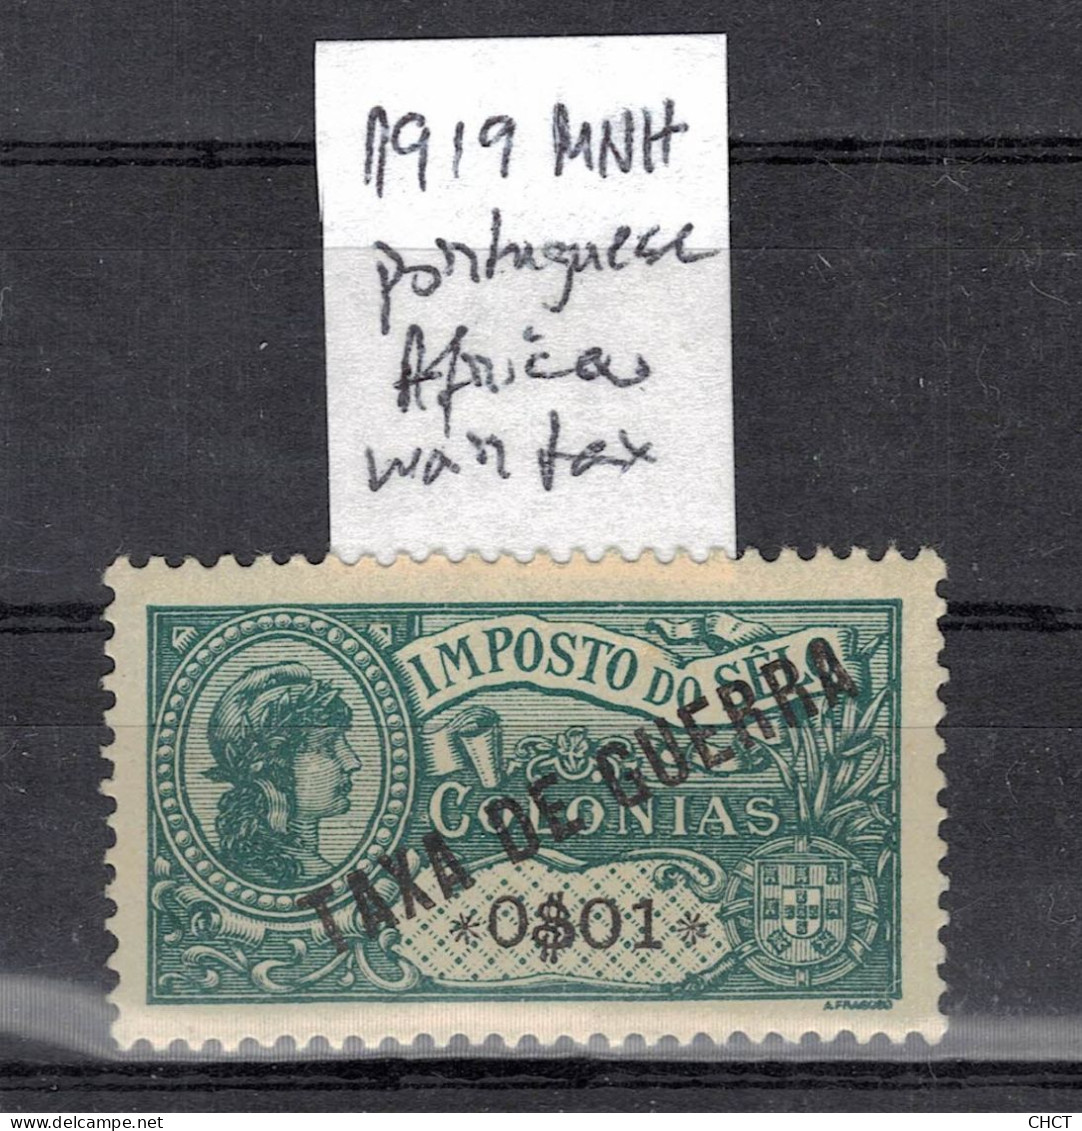 CHCT3 - War Tax Stamp, MNH, 1919, Portuguese Africa - Afrique Portugaise